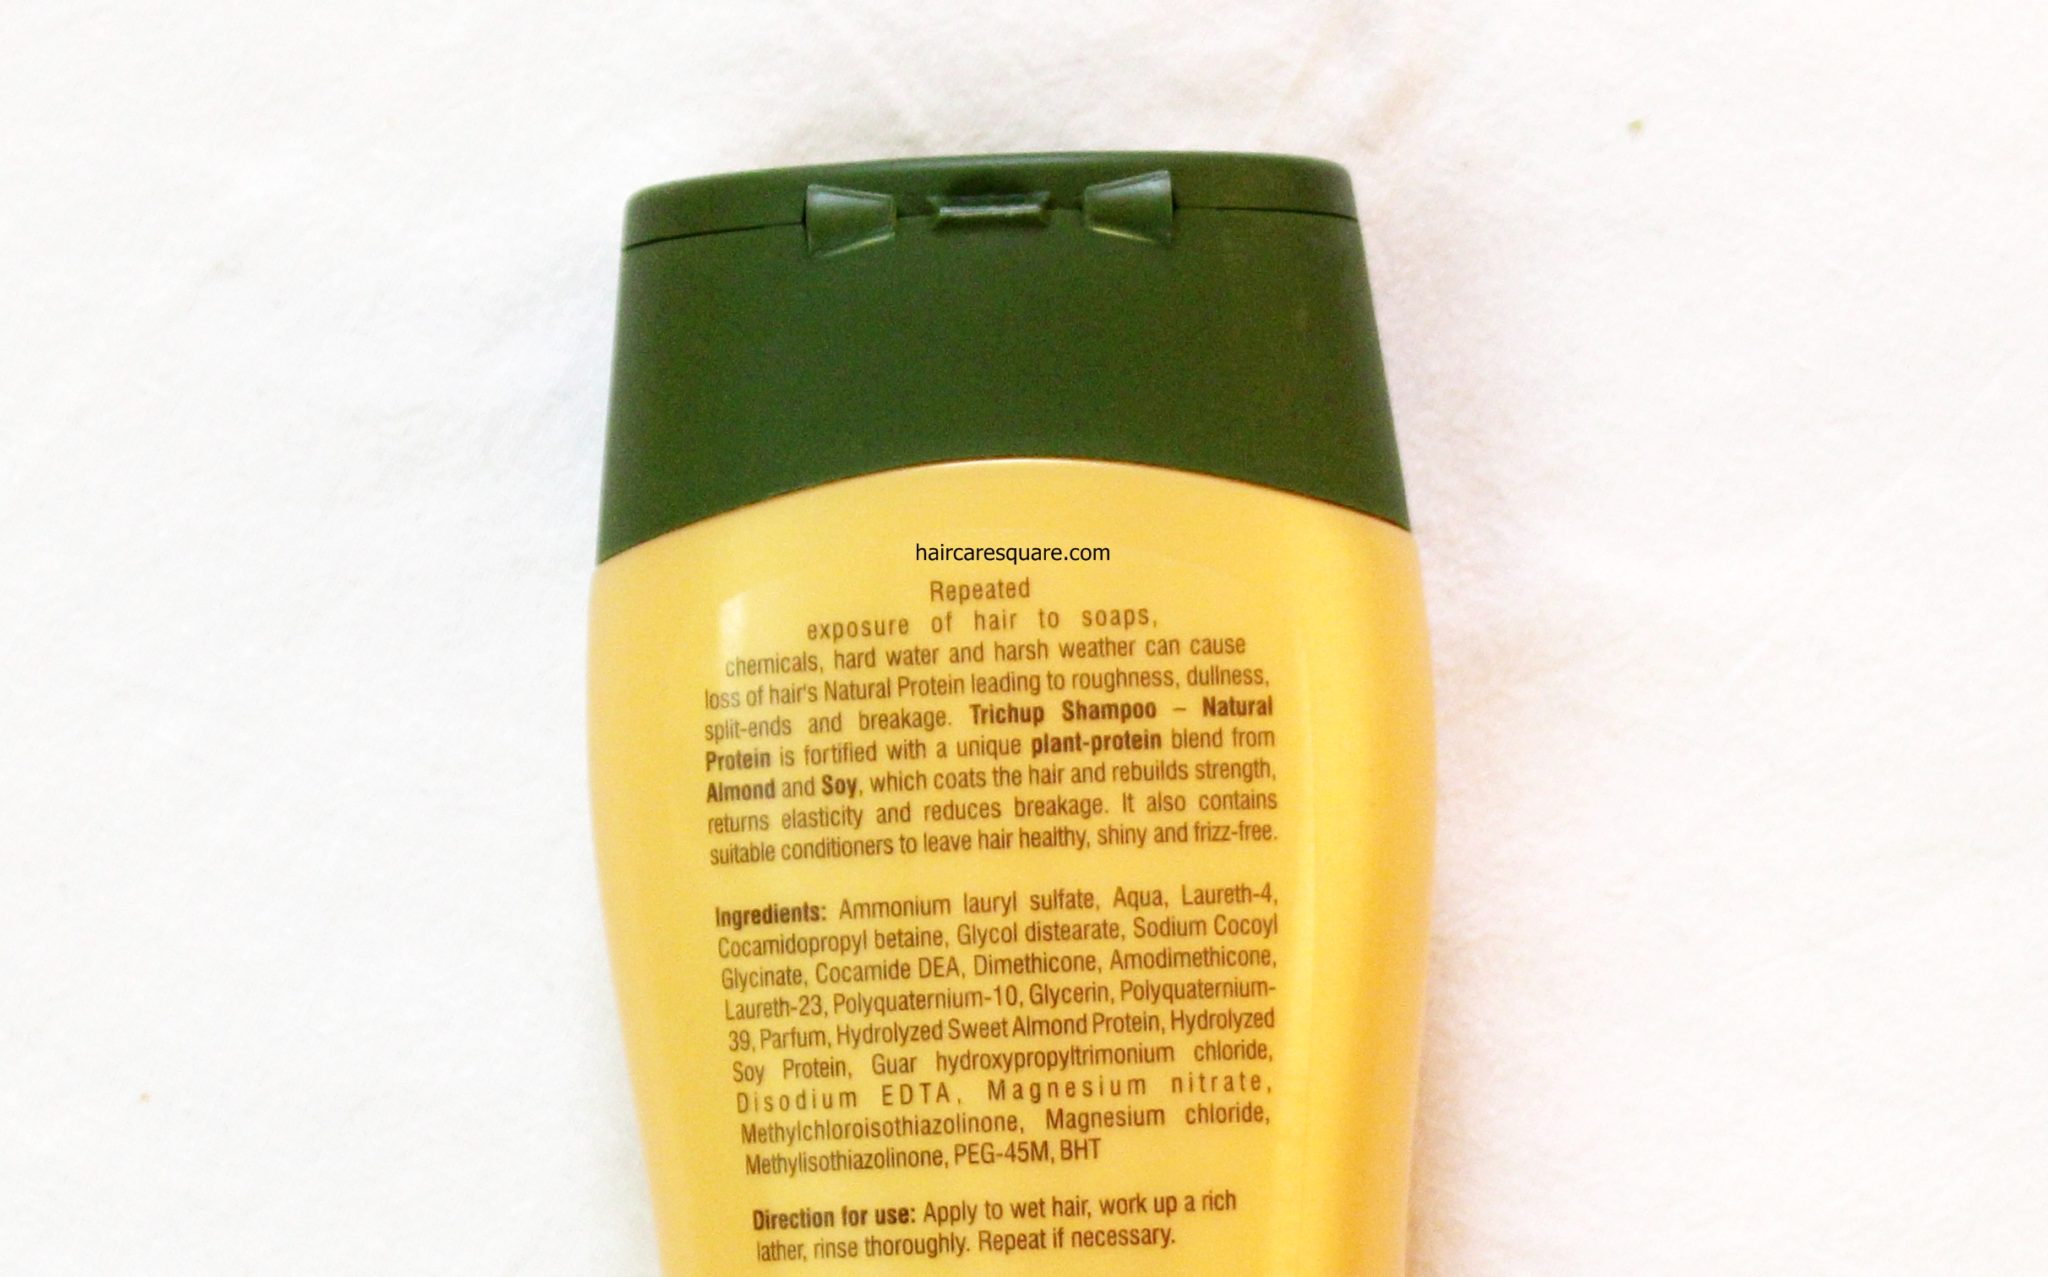 ingredients of trichup shampoo